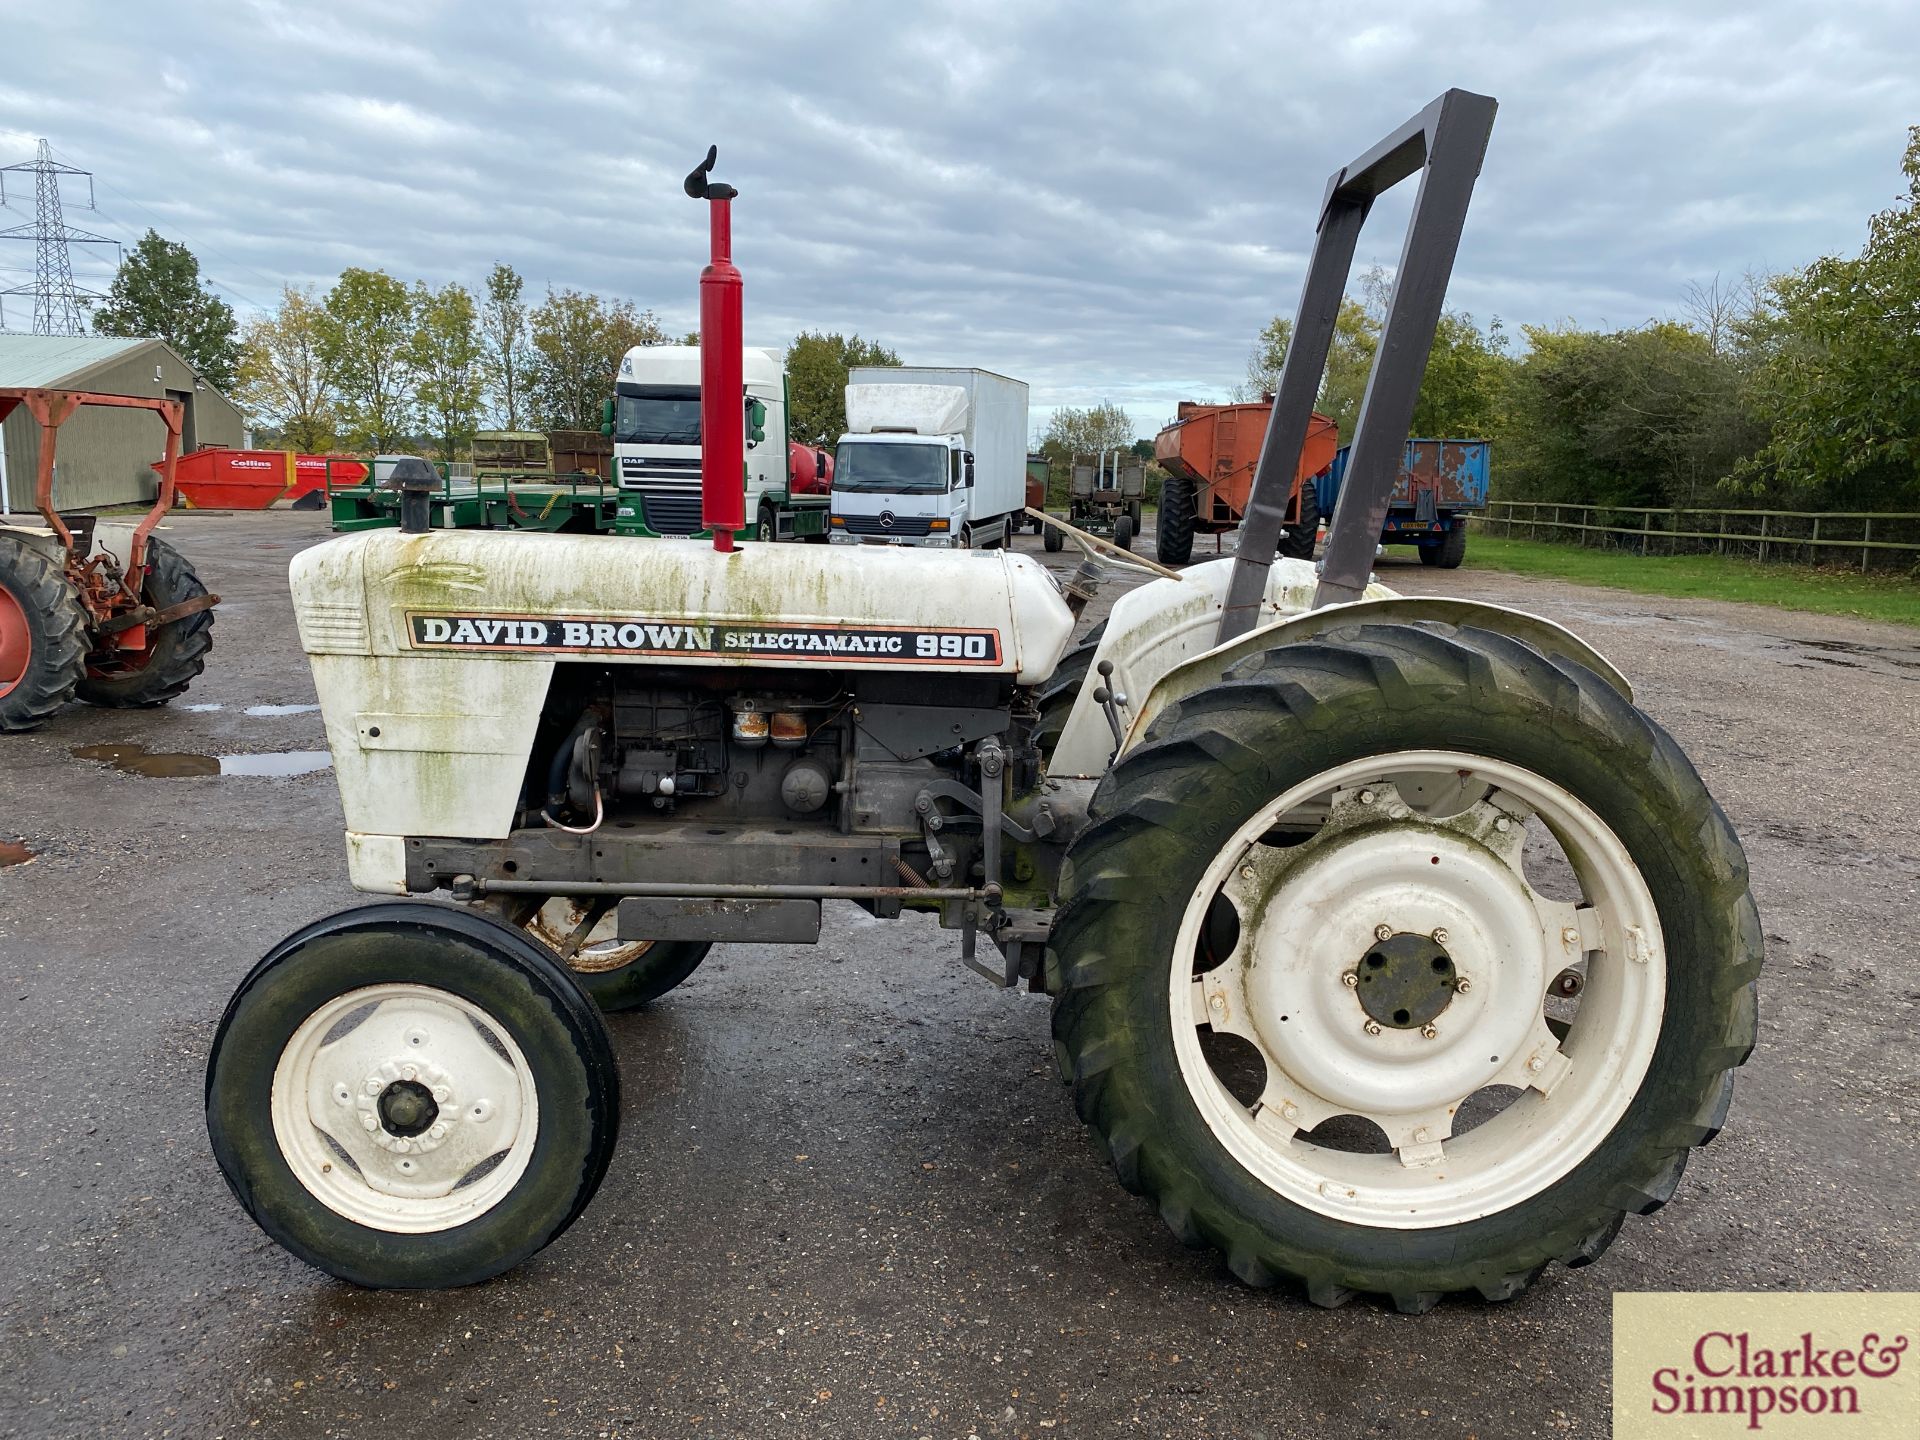 David Brown 990 Selectamatic 2WD tractor. Registration DUE 781D (no paperwork). Serial number 990A/ - Image 6 of 31